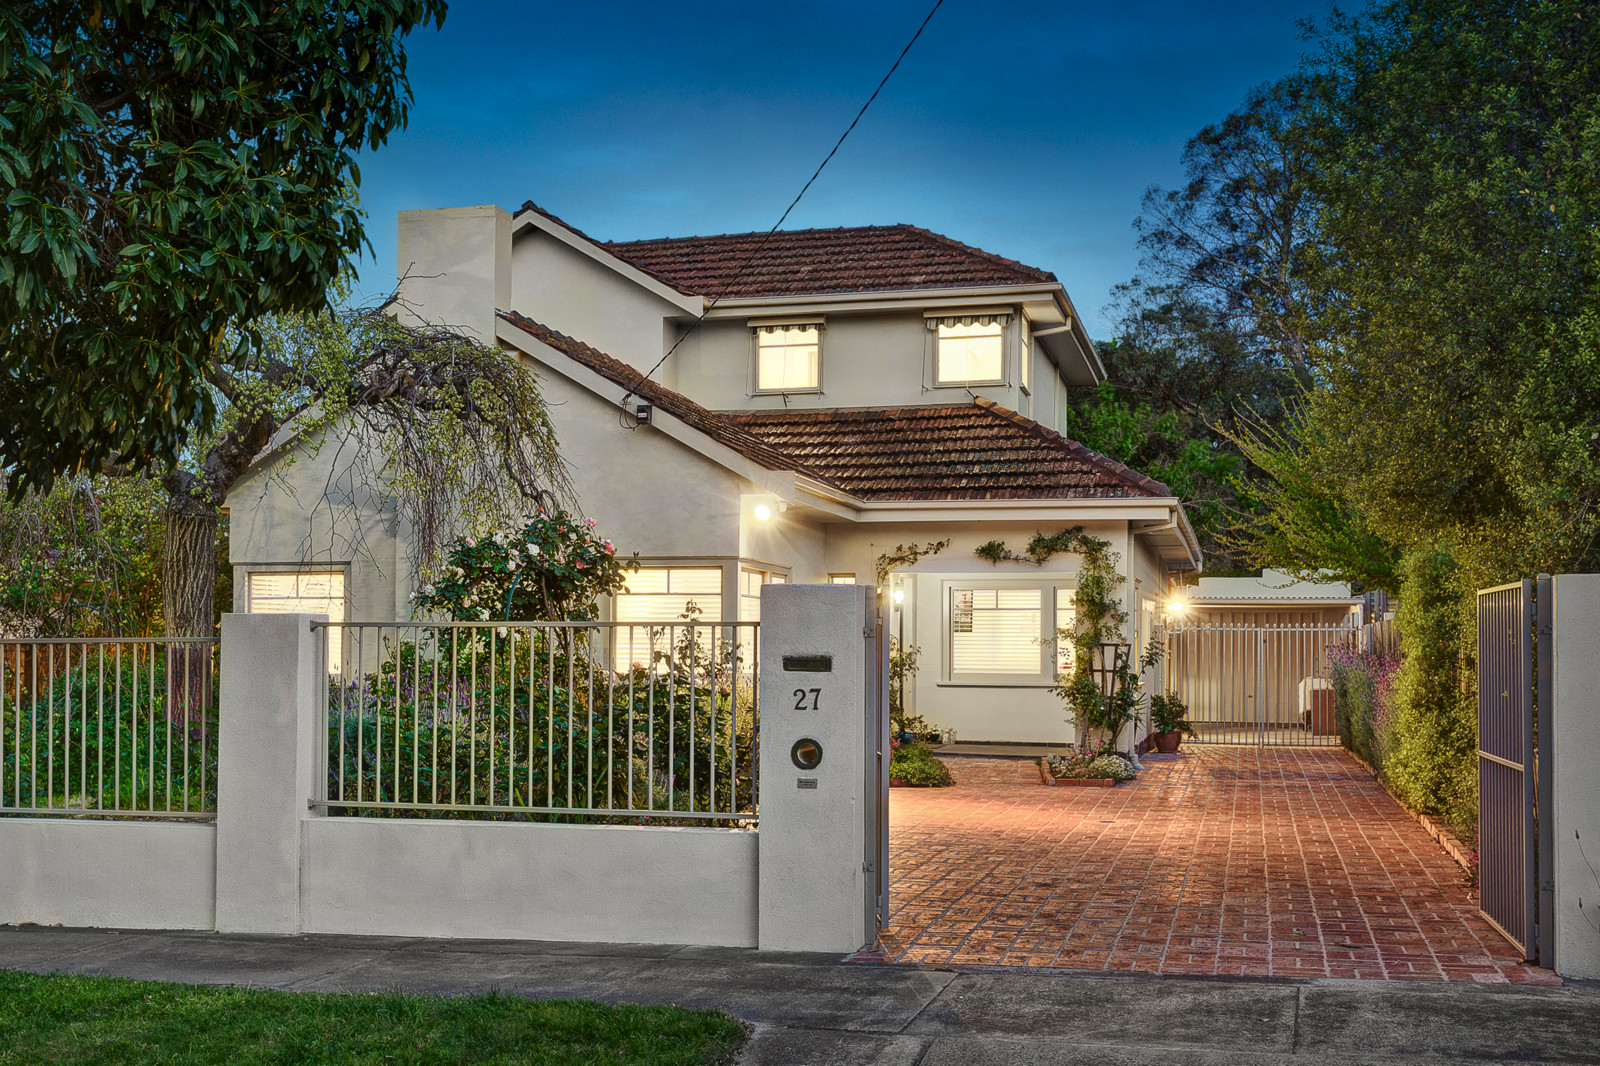 27 Outlook Drive, Camberwell - Image 1